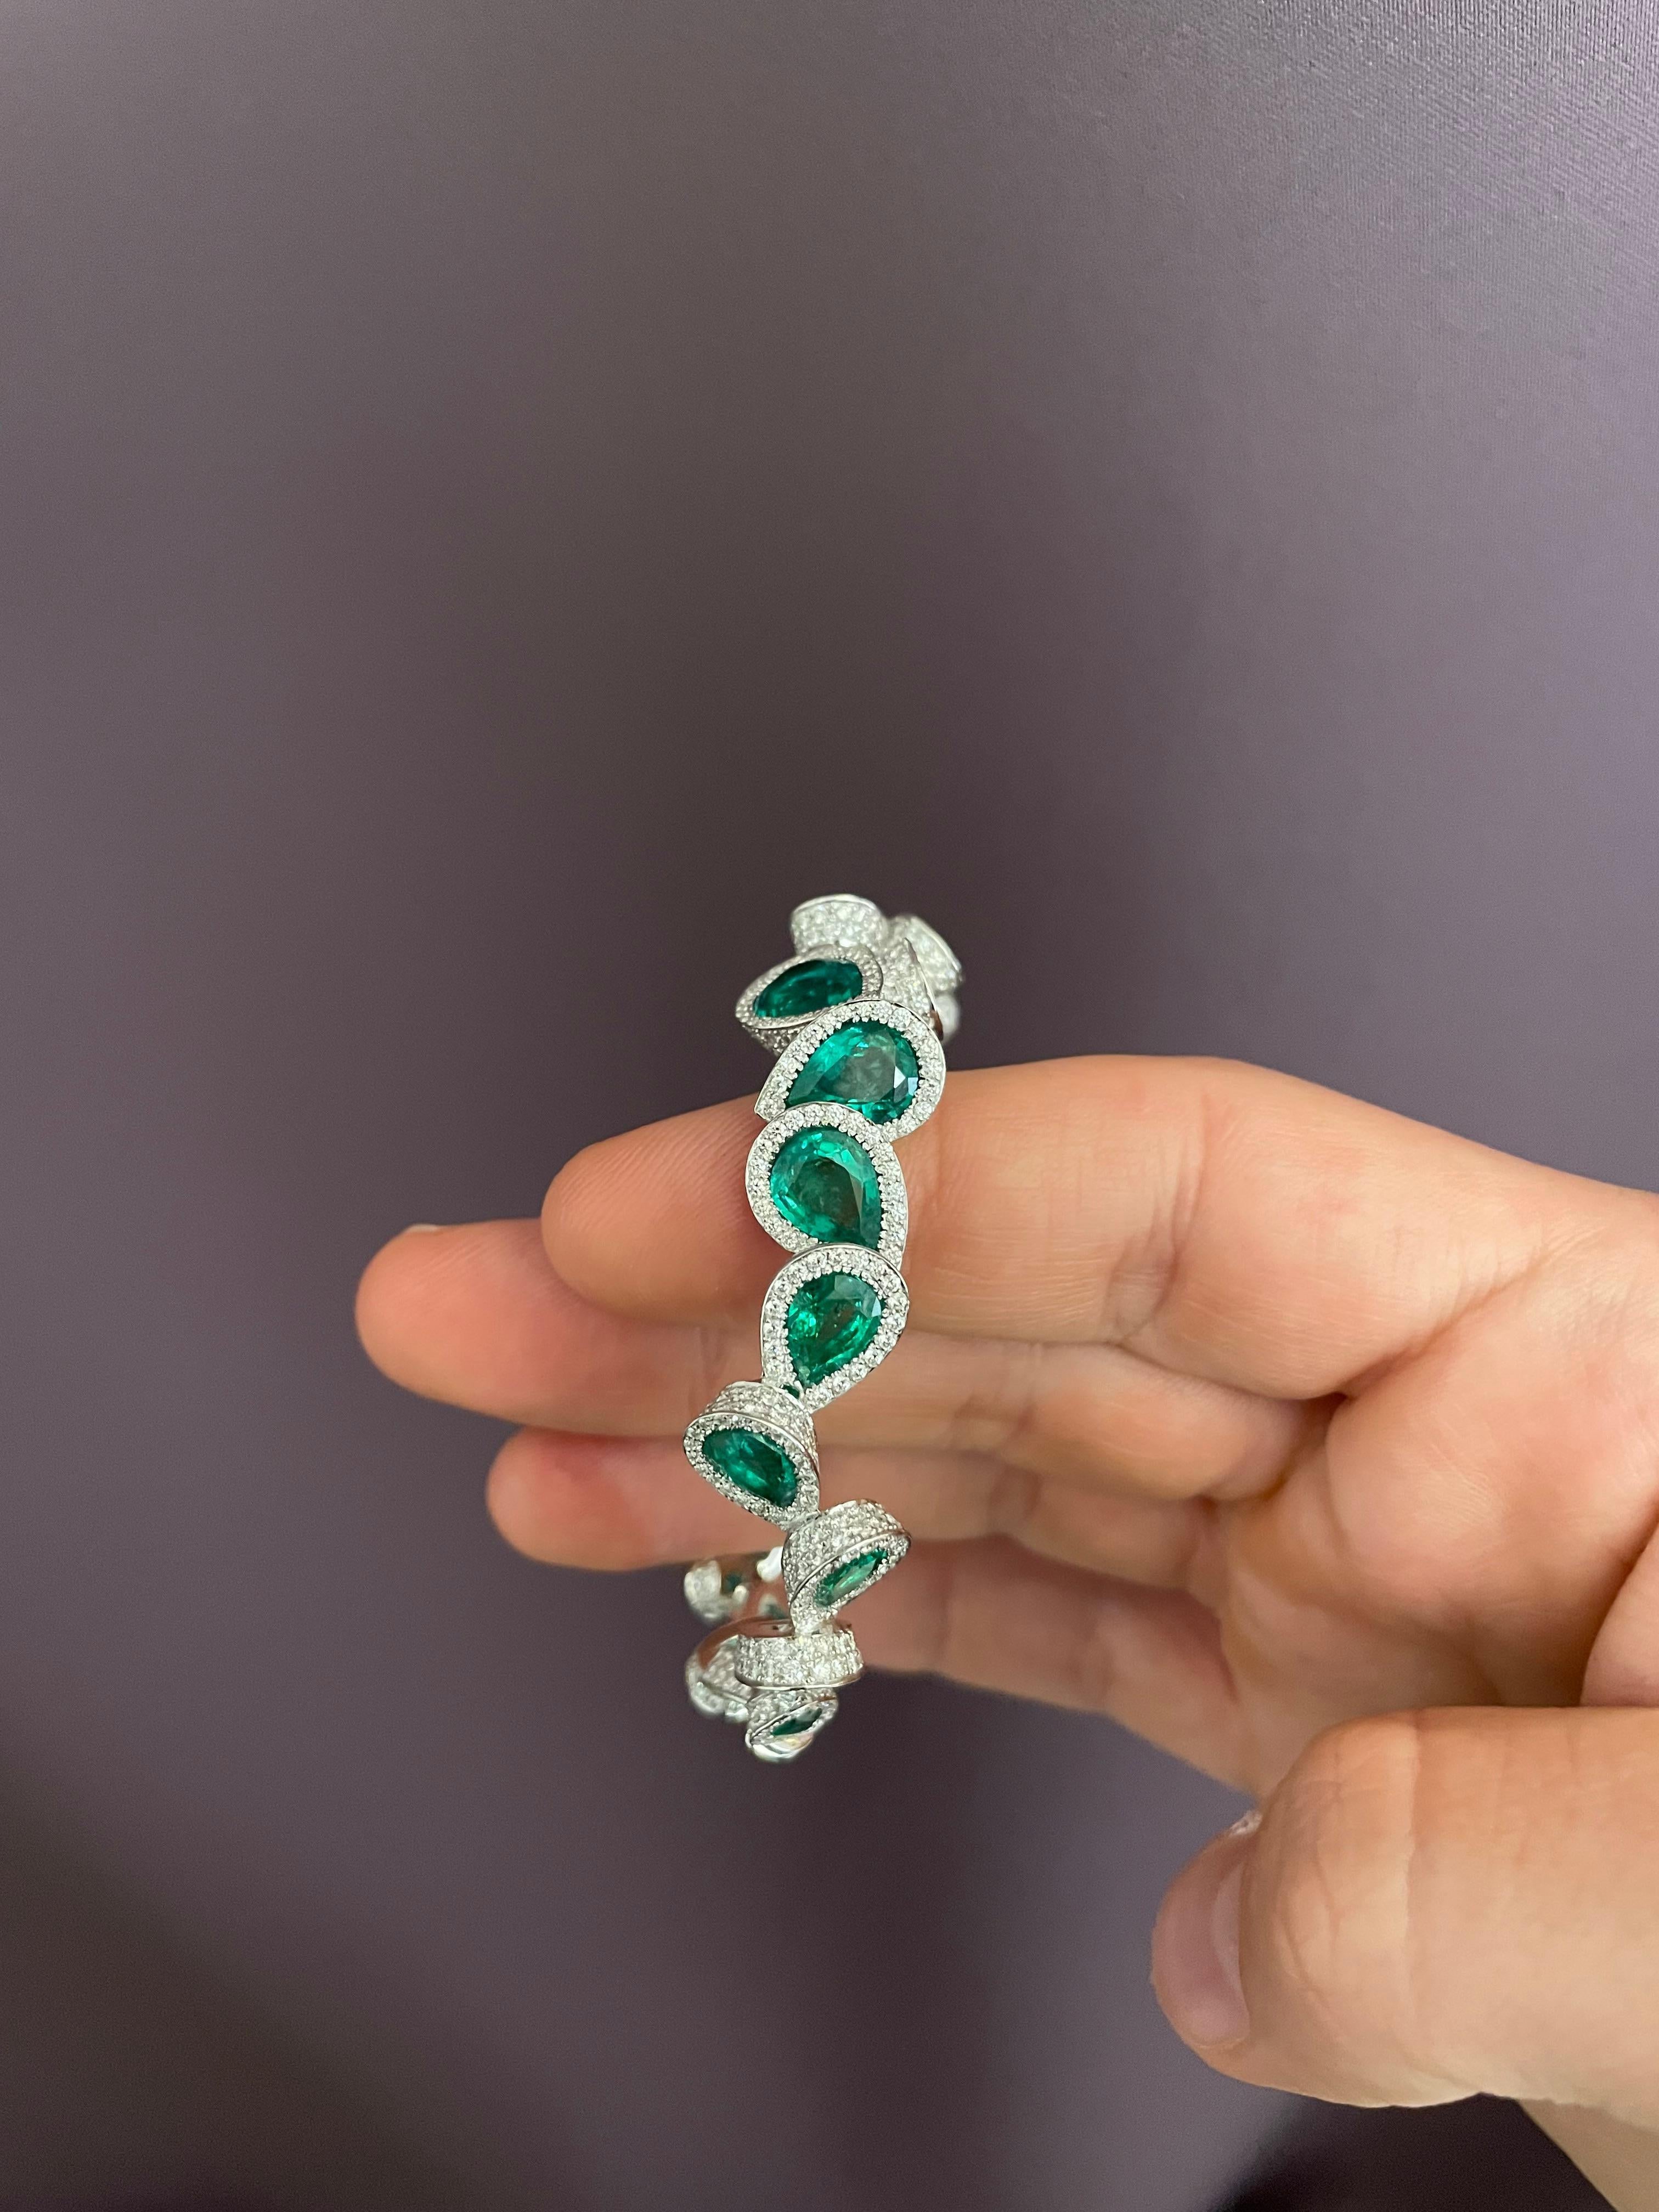 Rosior by Manuel Rosas Diamond and Emerald Bracelet made in 19.2 K Gold and set with:
- 17 Pear Cut Zambian Emeralds with 11,38 ct 
- 8 GIA Certified Pear Cut Diamonds Colors D, E and F with different weights from 0,30ct to 0,70ct with the following